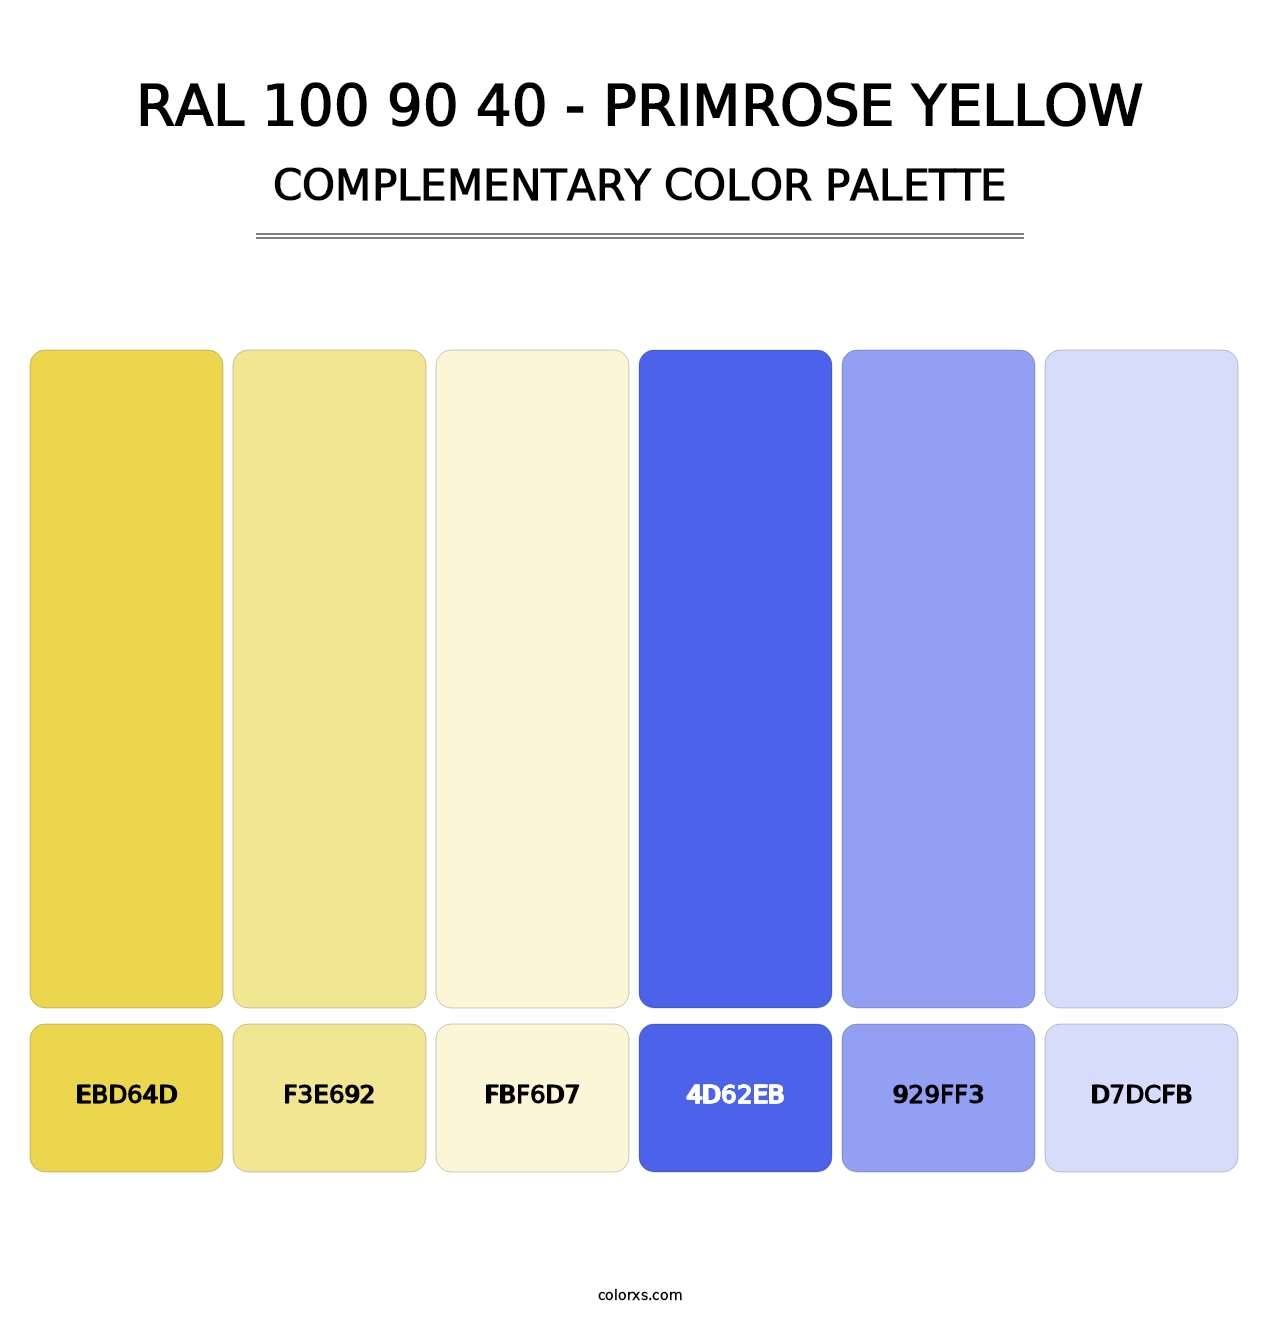 RAL 100 90 40 - Primrose Yellow - Complementary Color Palette